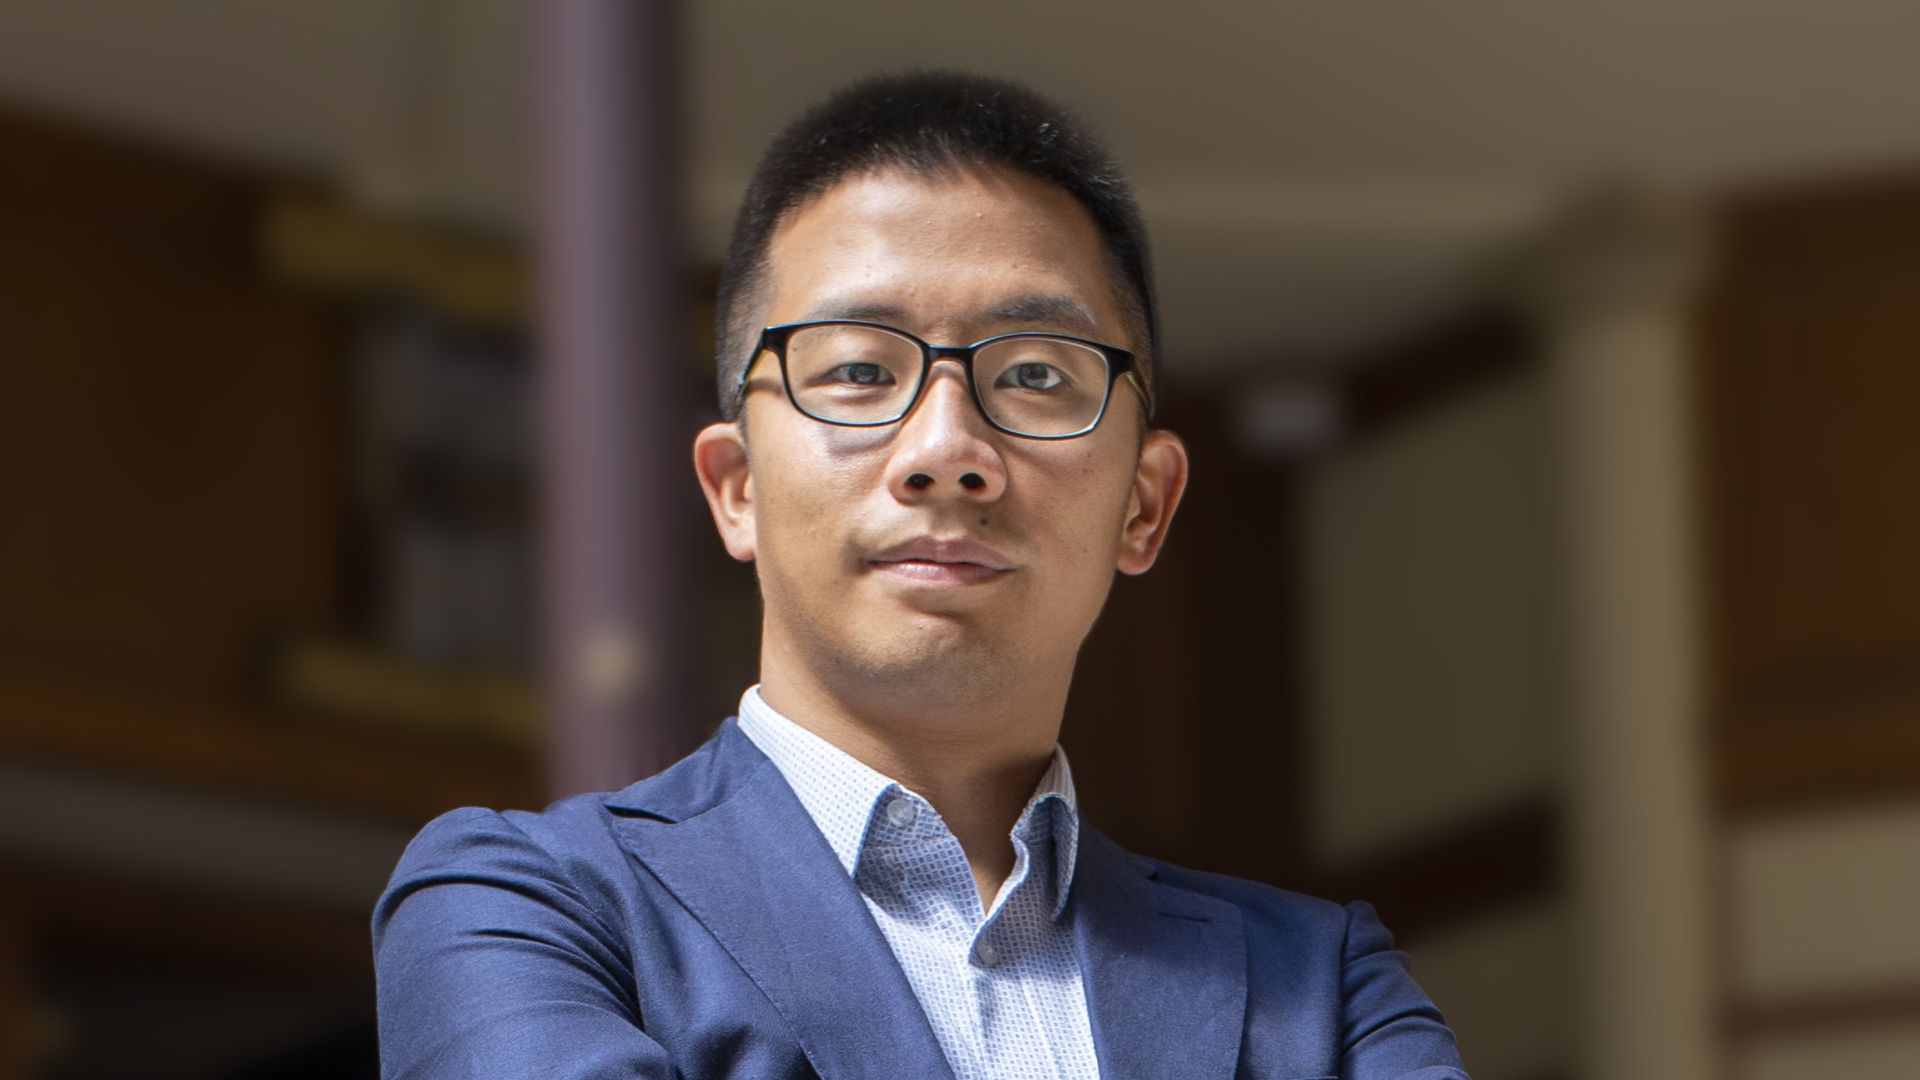 Cleveland law professor Matthew Ahn stands with his arms crossed posing for a photo.